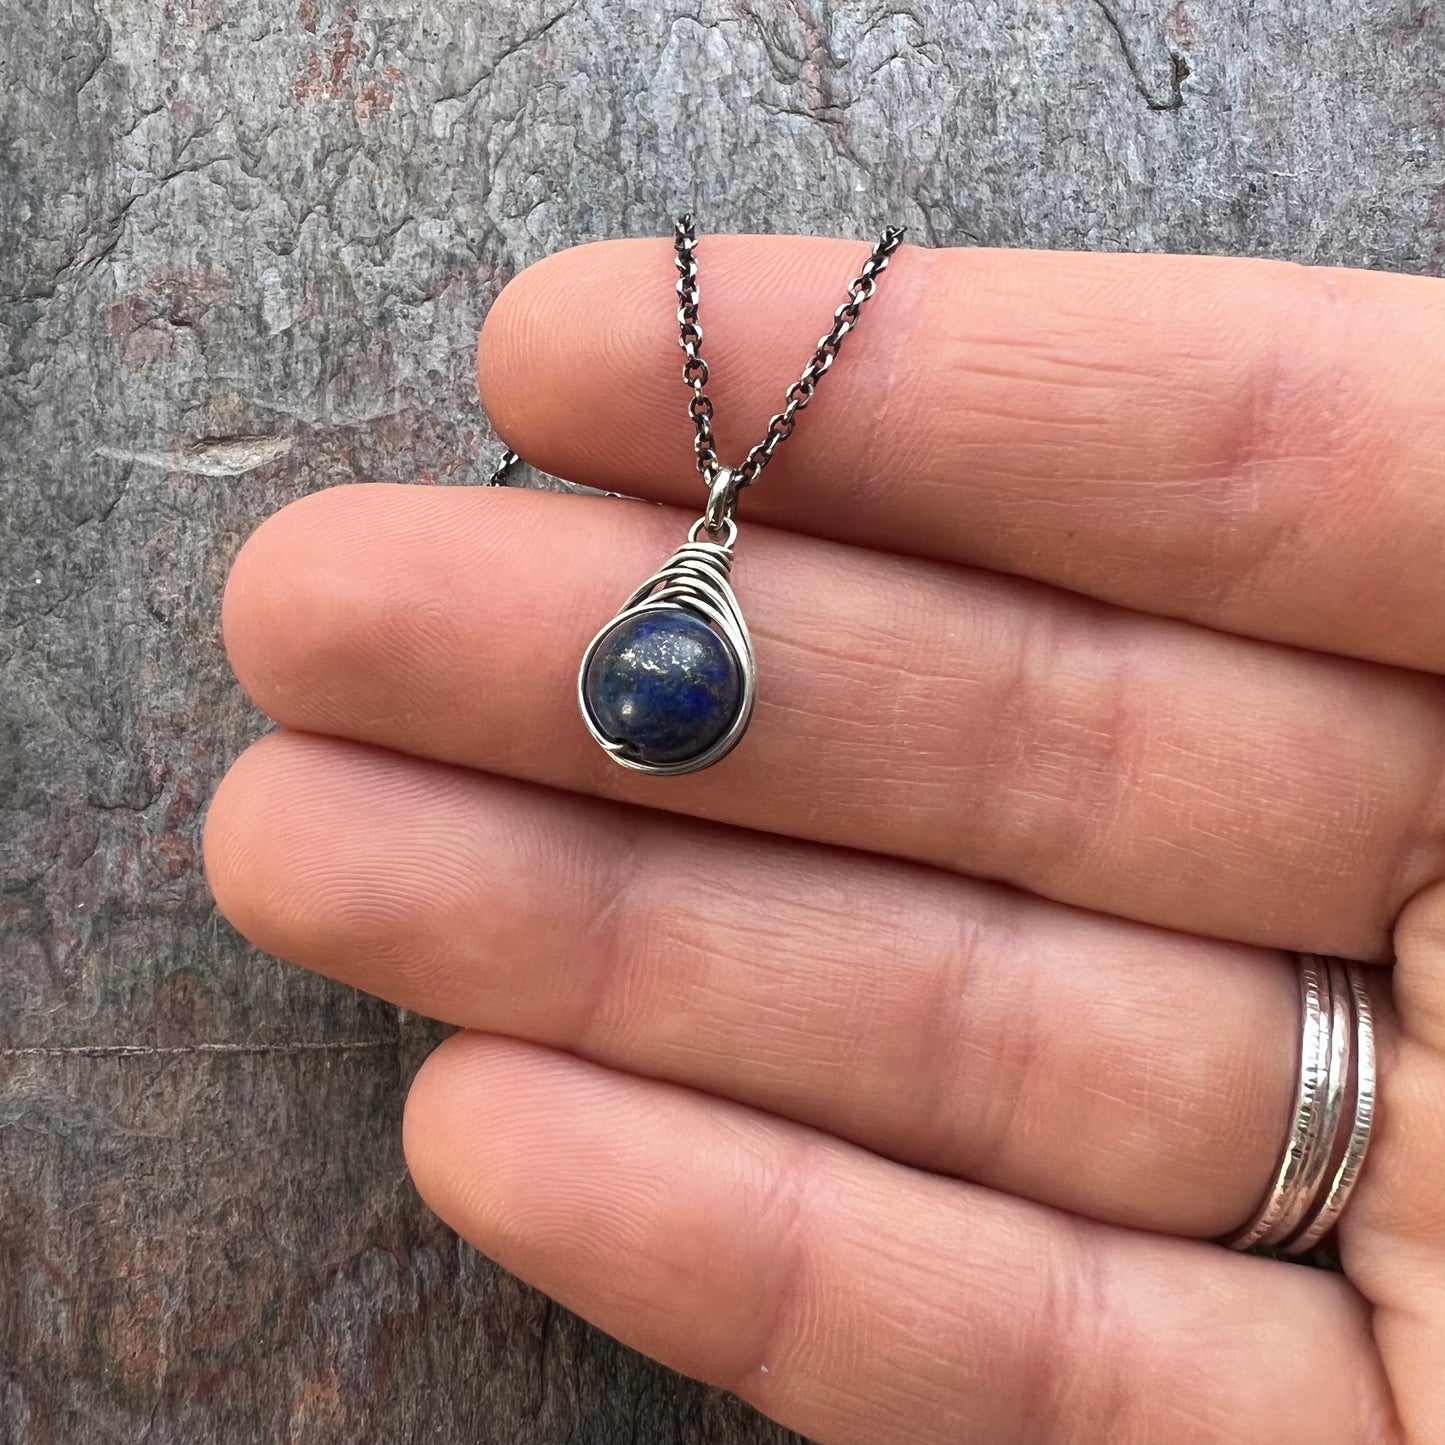 Lapis Lazuli Sterling Silver Necklace - Wire-wrapped Lapis Lazuli Pendant on Sterling Silver Chain